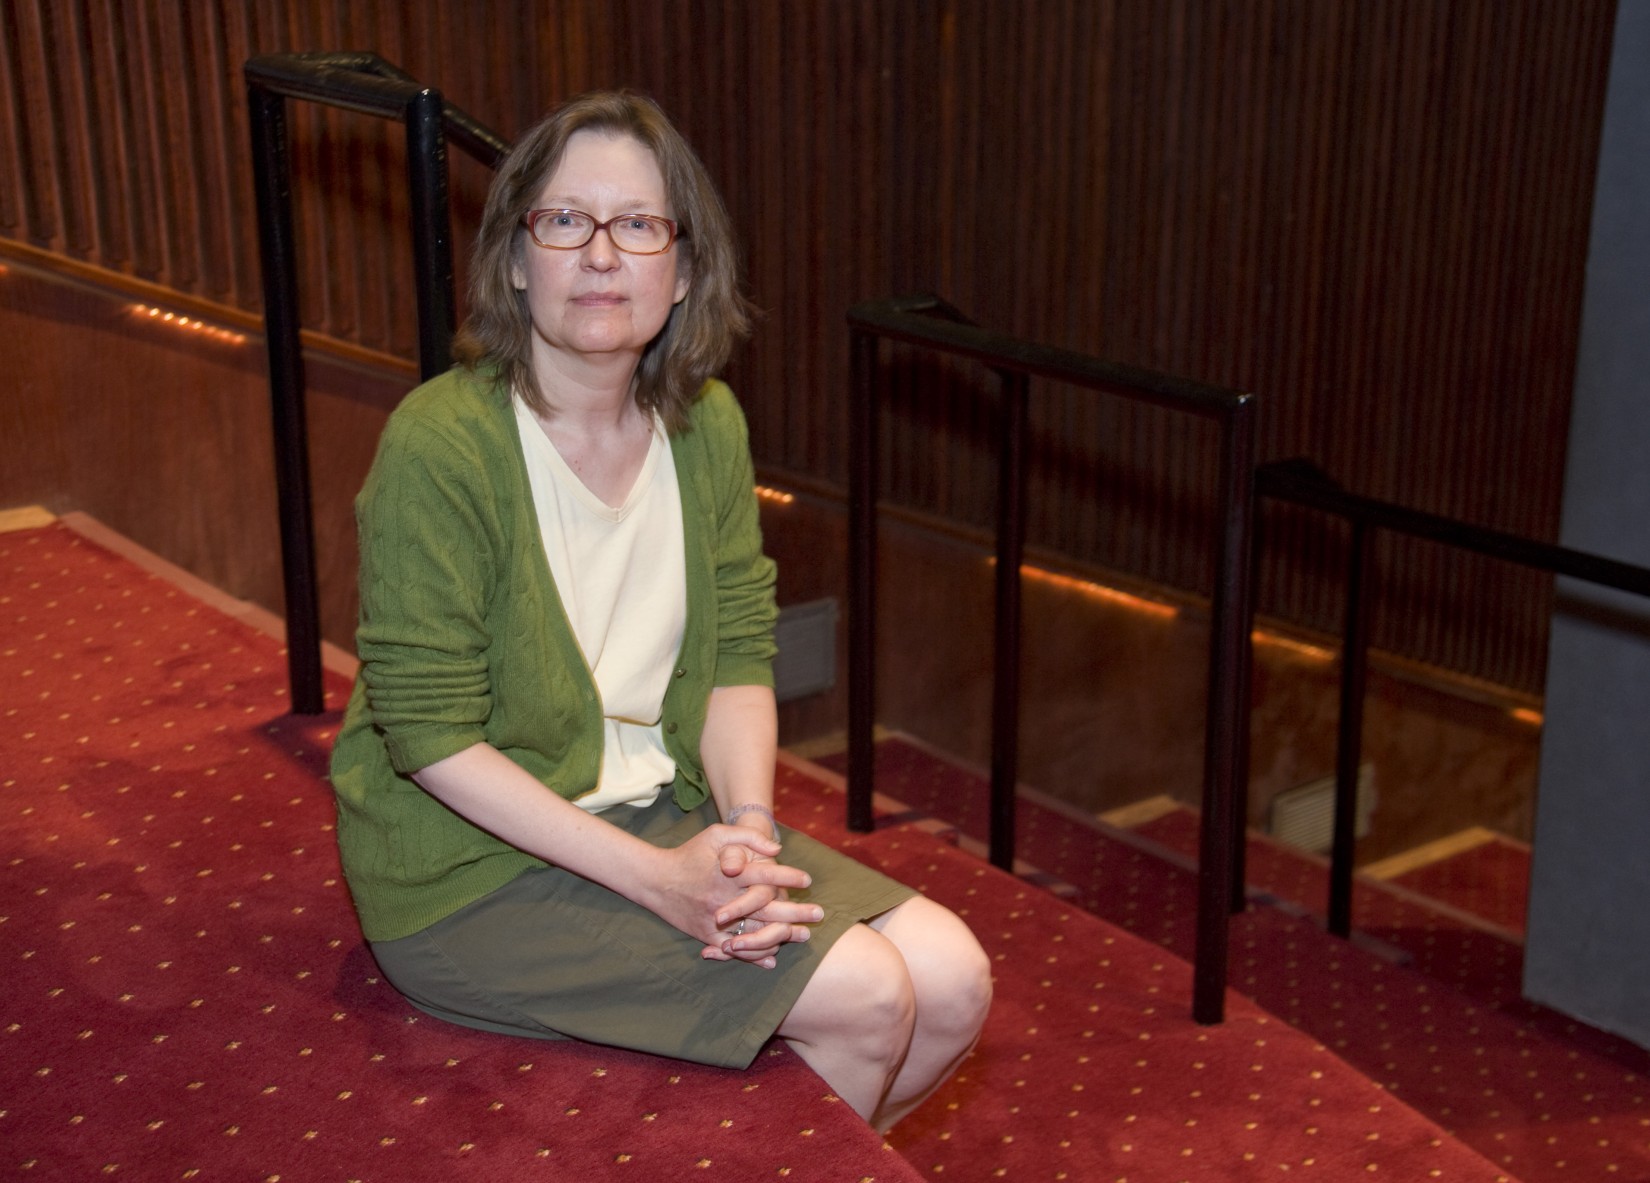 Mary Fleischer, Chair of the Department of Theatre Arts